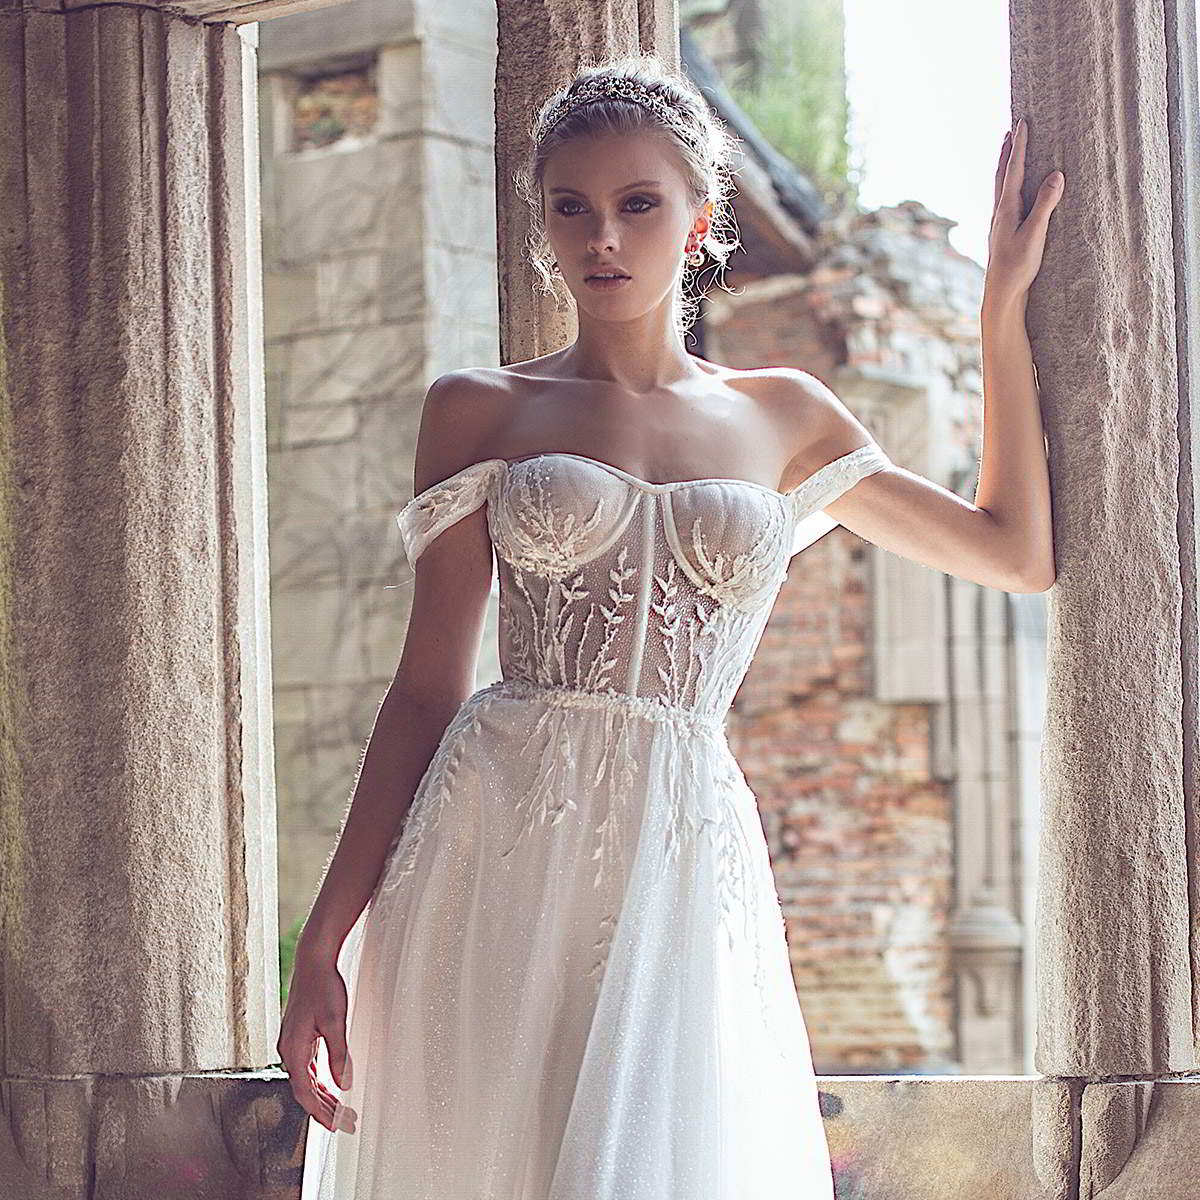 yaniv persy fall 2020 bridal collection featured on wedding inspirasi thumbnail